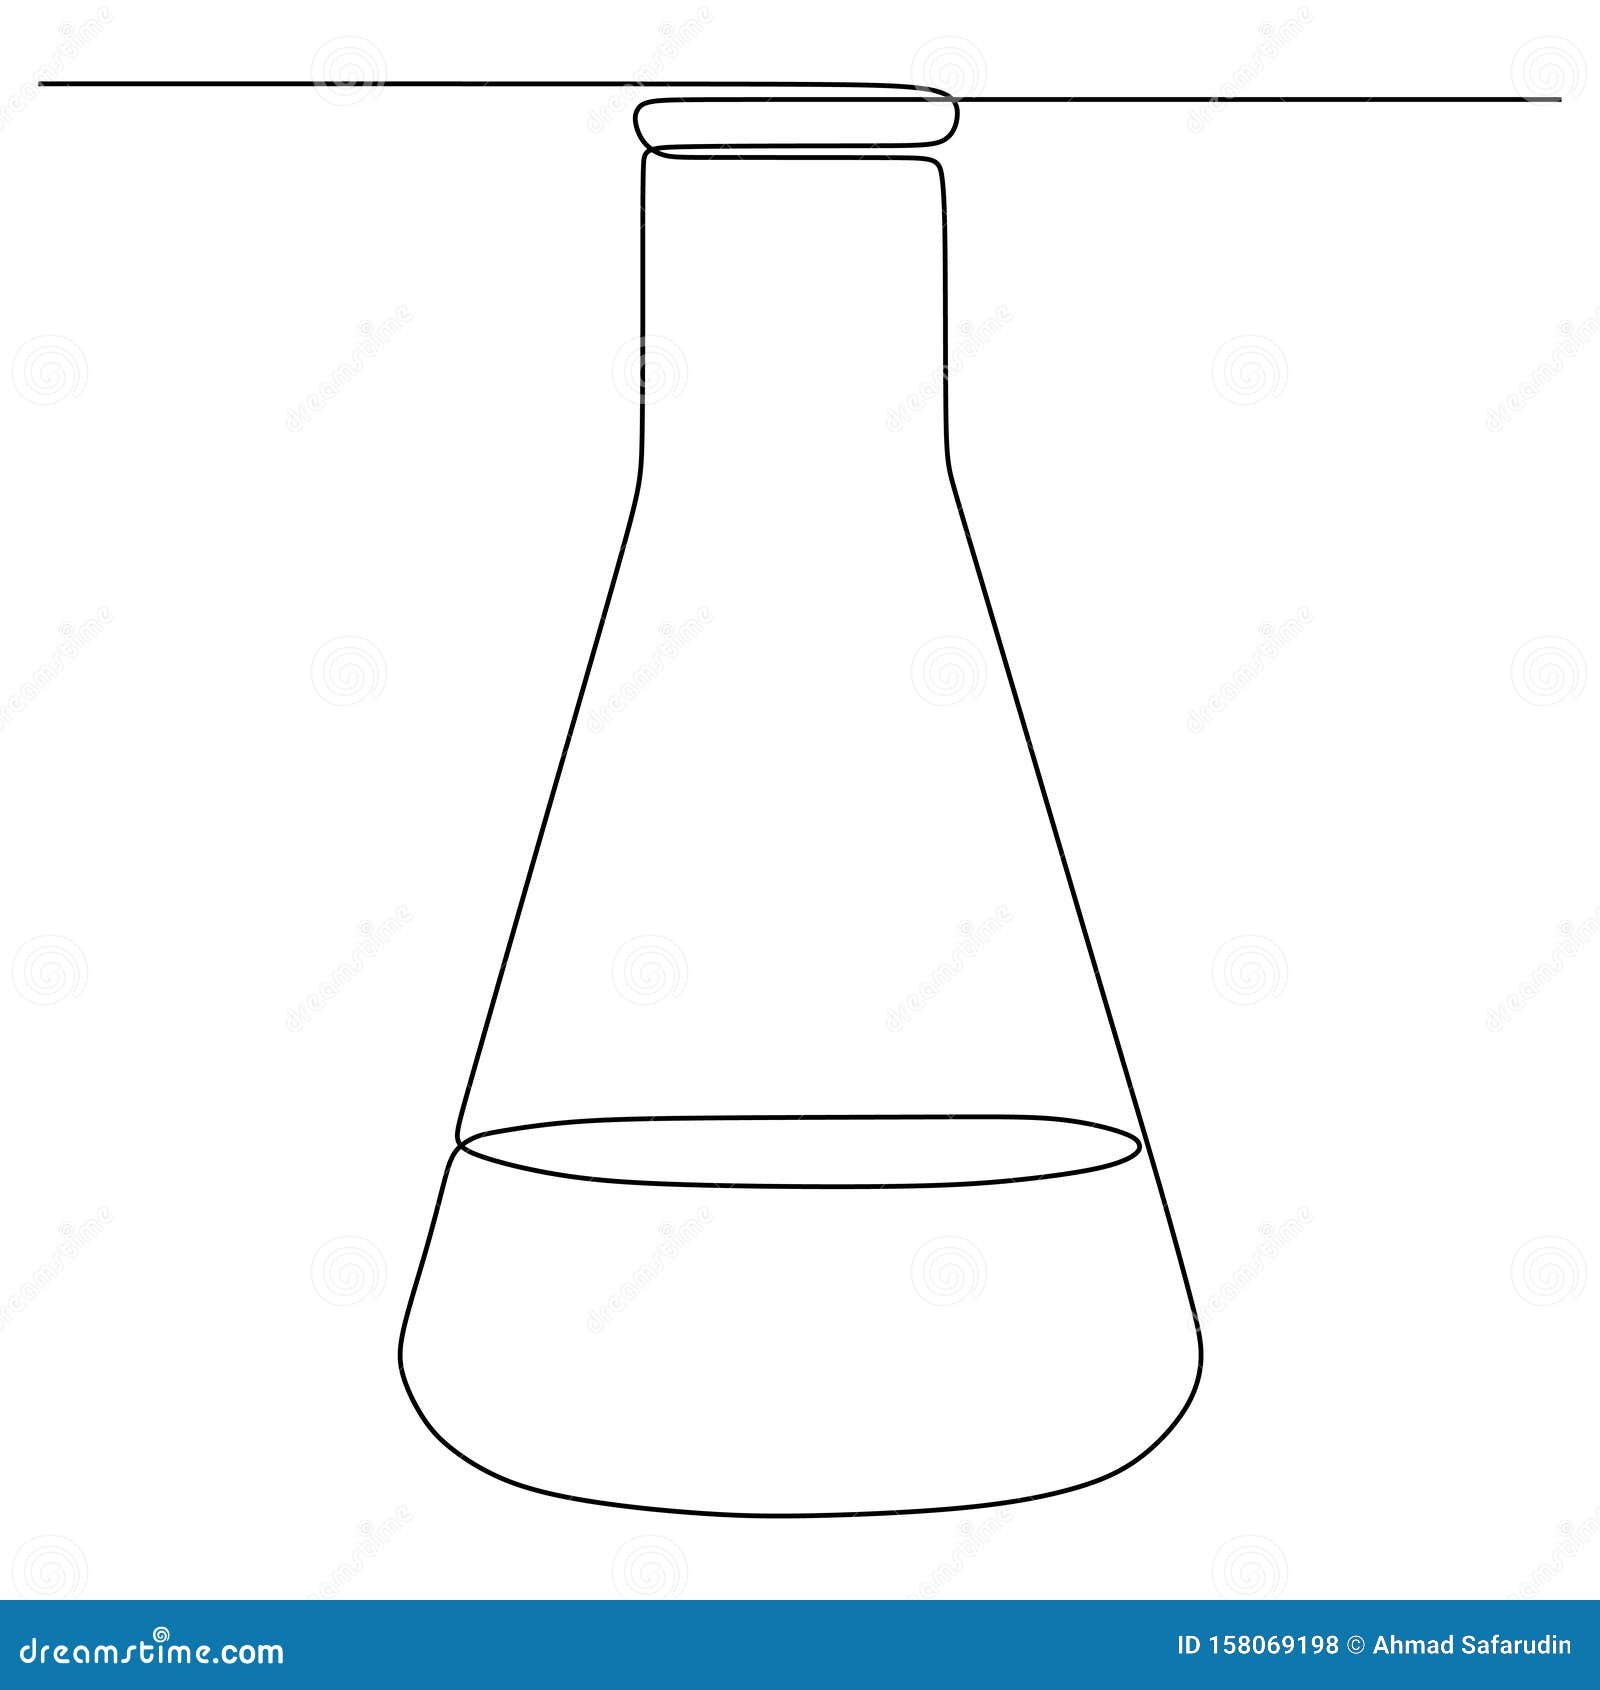 70+ Drawing Of A Erlenmeyer Flask Illustrations, Royalty-Free Vector  Graphics & Clip Art - iStock